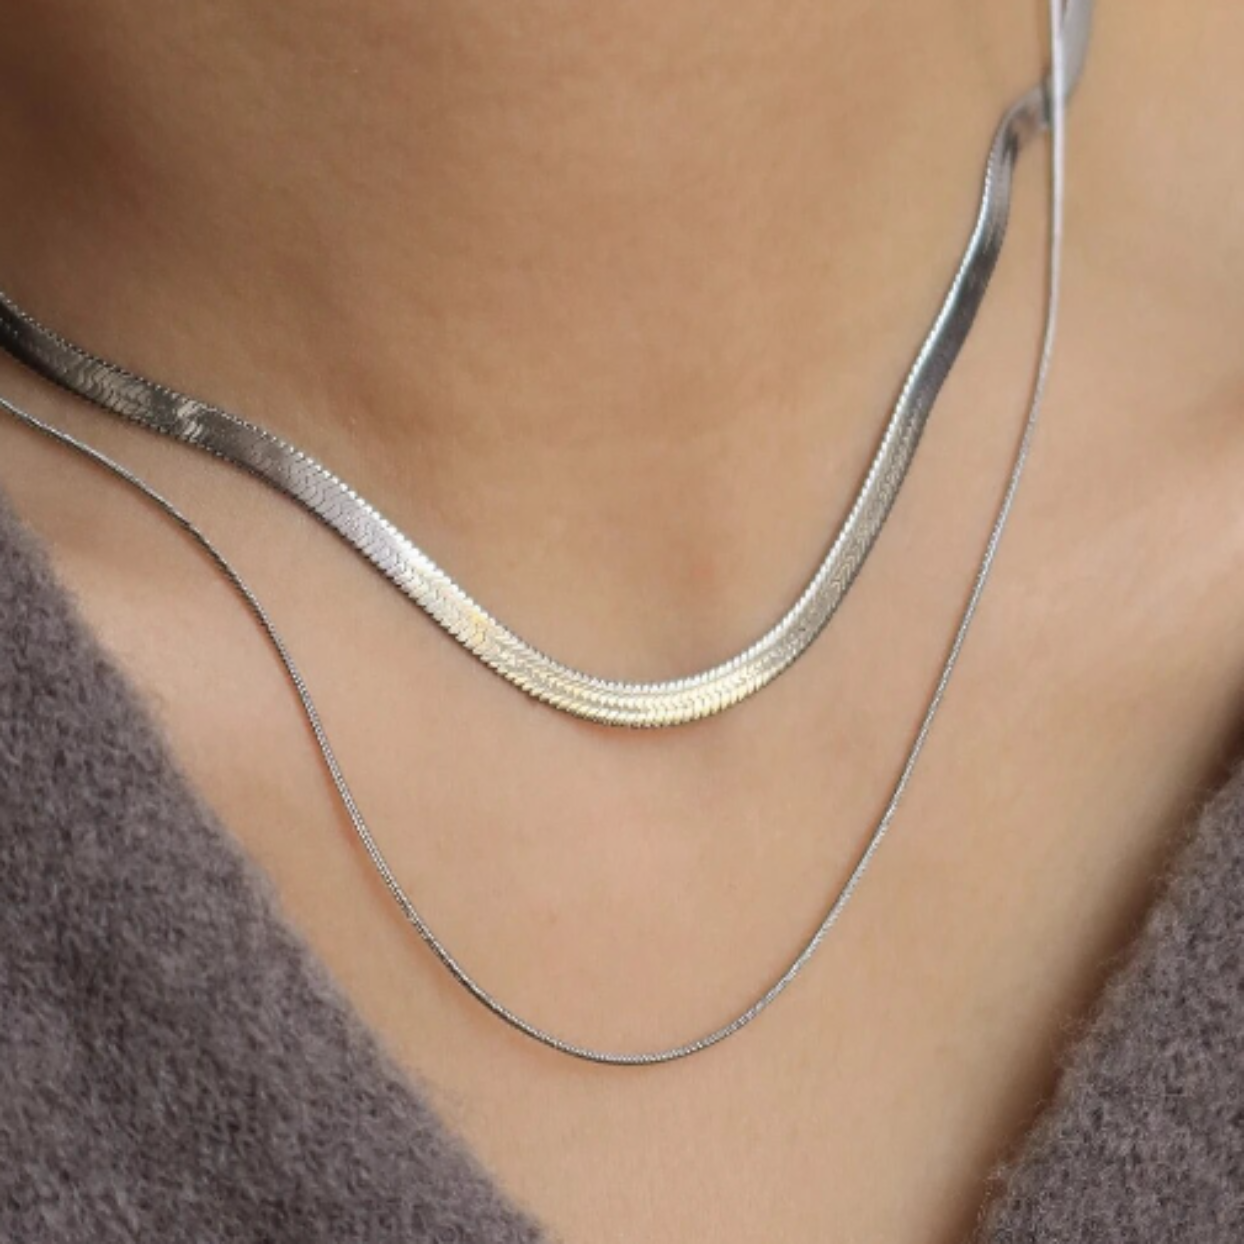 CLASSIC SILVER SNAKE - WATER PROOF NECKLACE - Premium necklaces from www.beachboho.com.au - Just $55! Shop now at www.beachboho.com.au